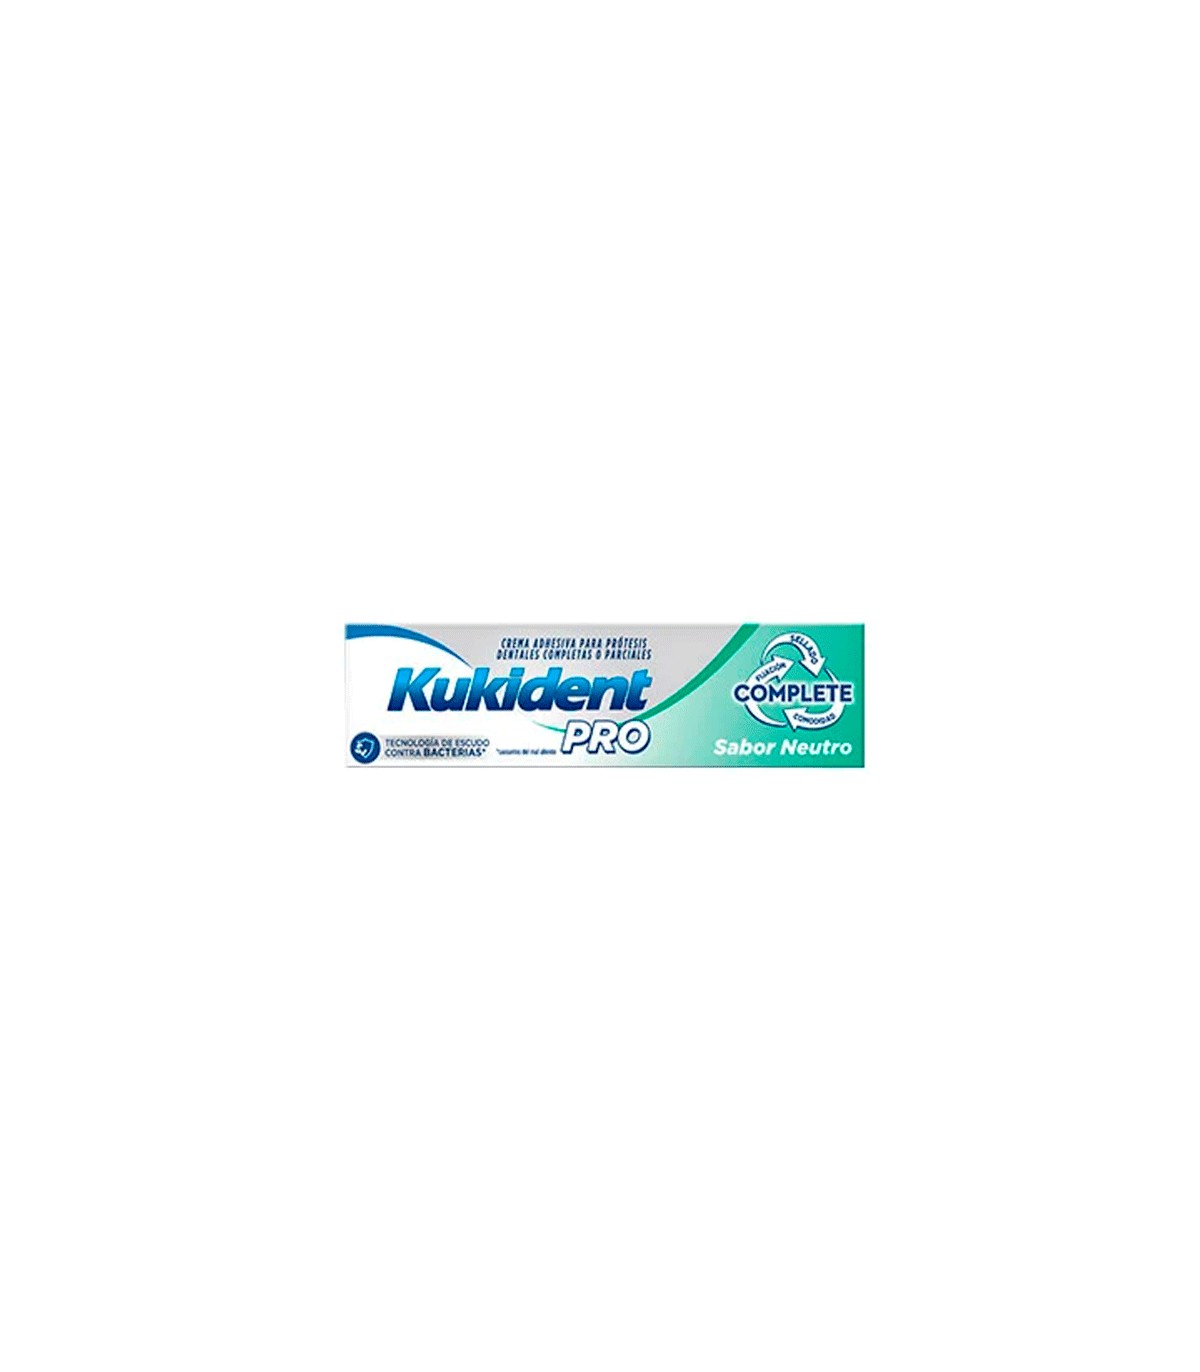 KUKIDENT Pro Complete Neutral Flavor 47g Buy OFFER at Farma2Go